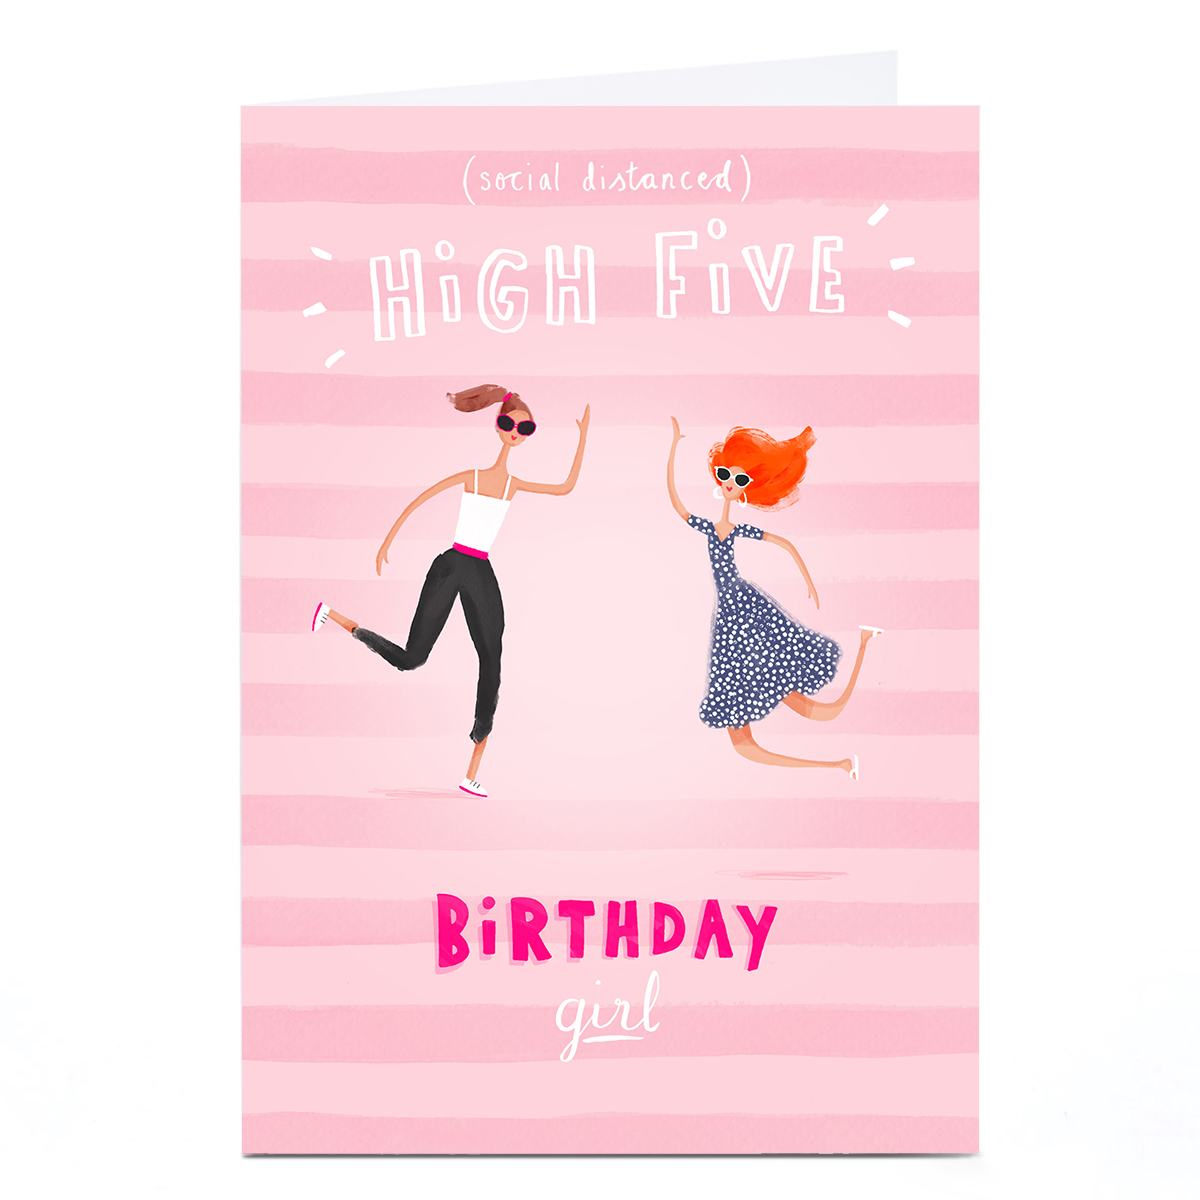 Personalised Andrew Thornton Birthday Card - Social Distanced High Five